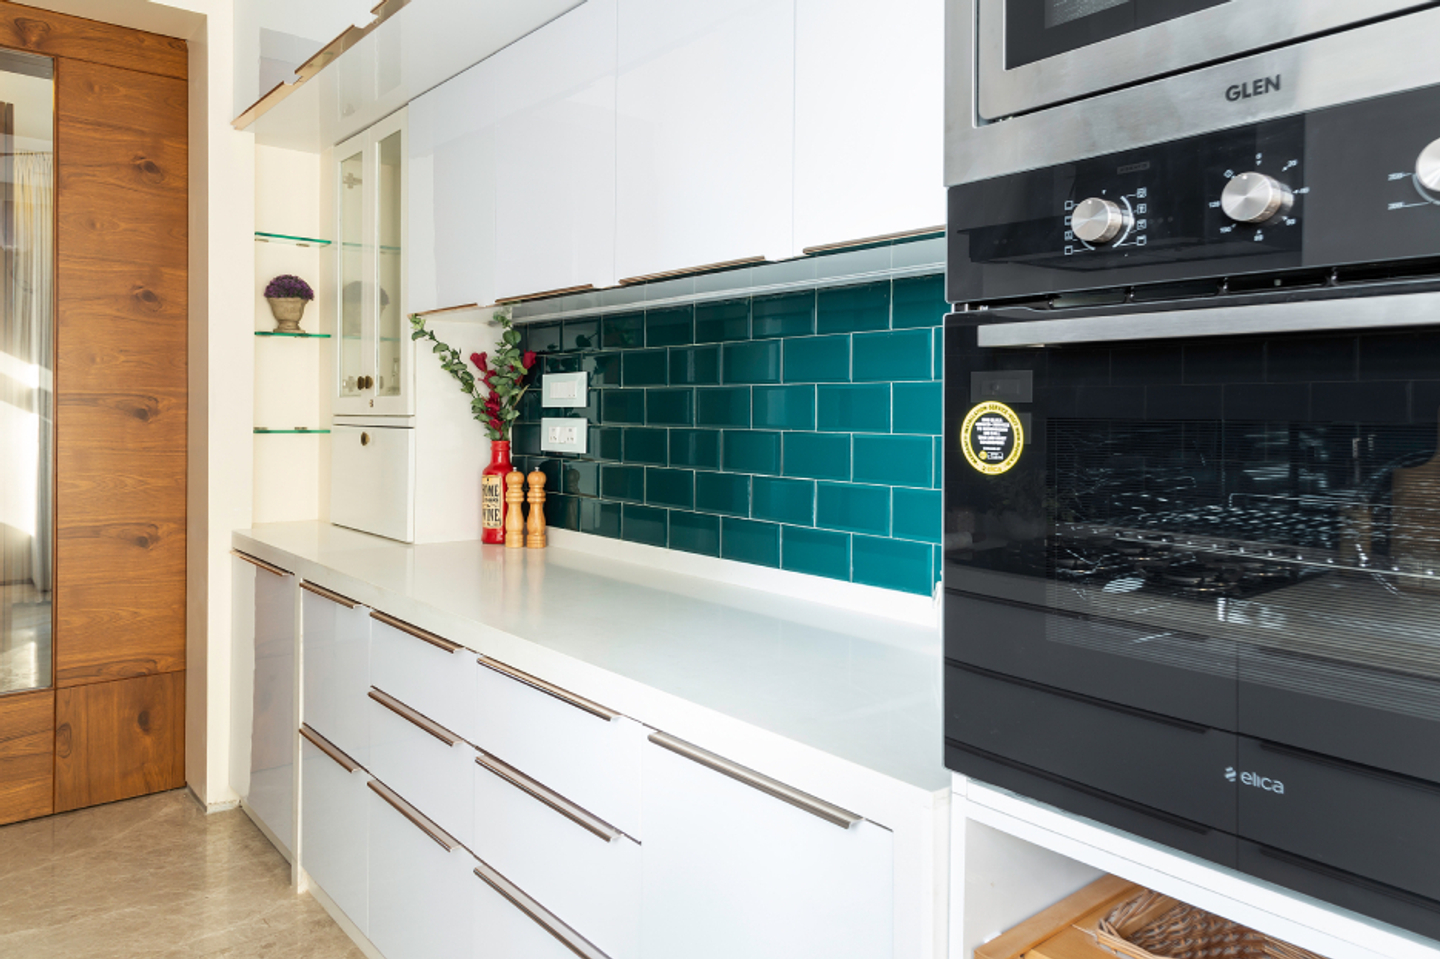 Contemporary Parallel Kitchen Design With Turquoise Subway Tiles